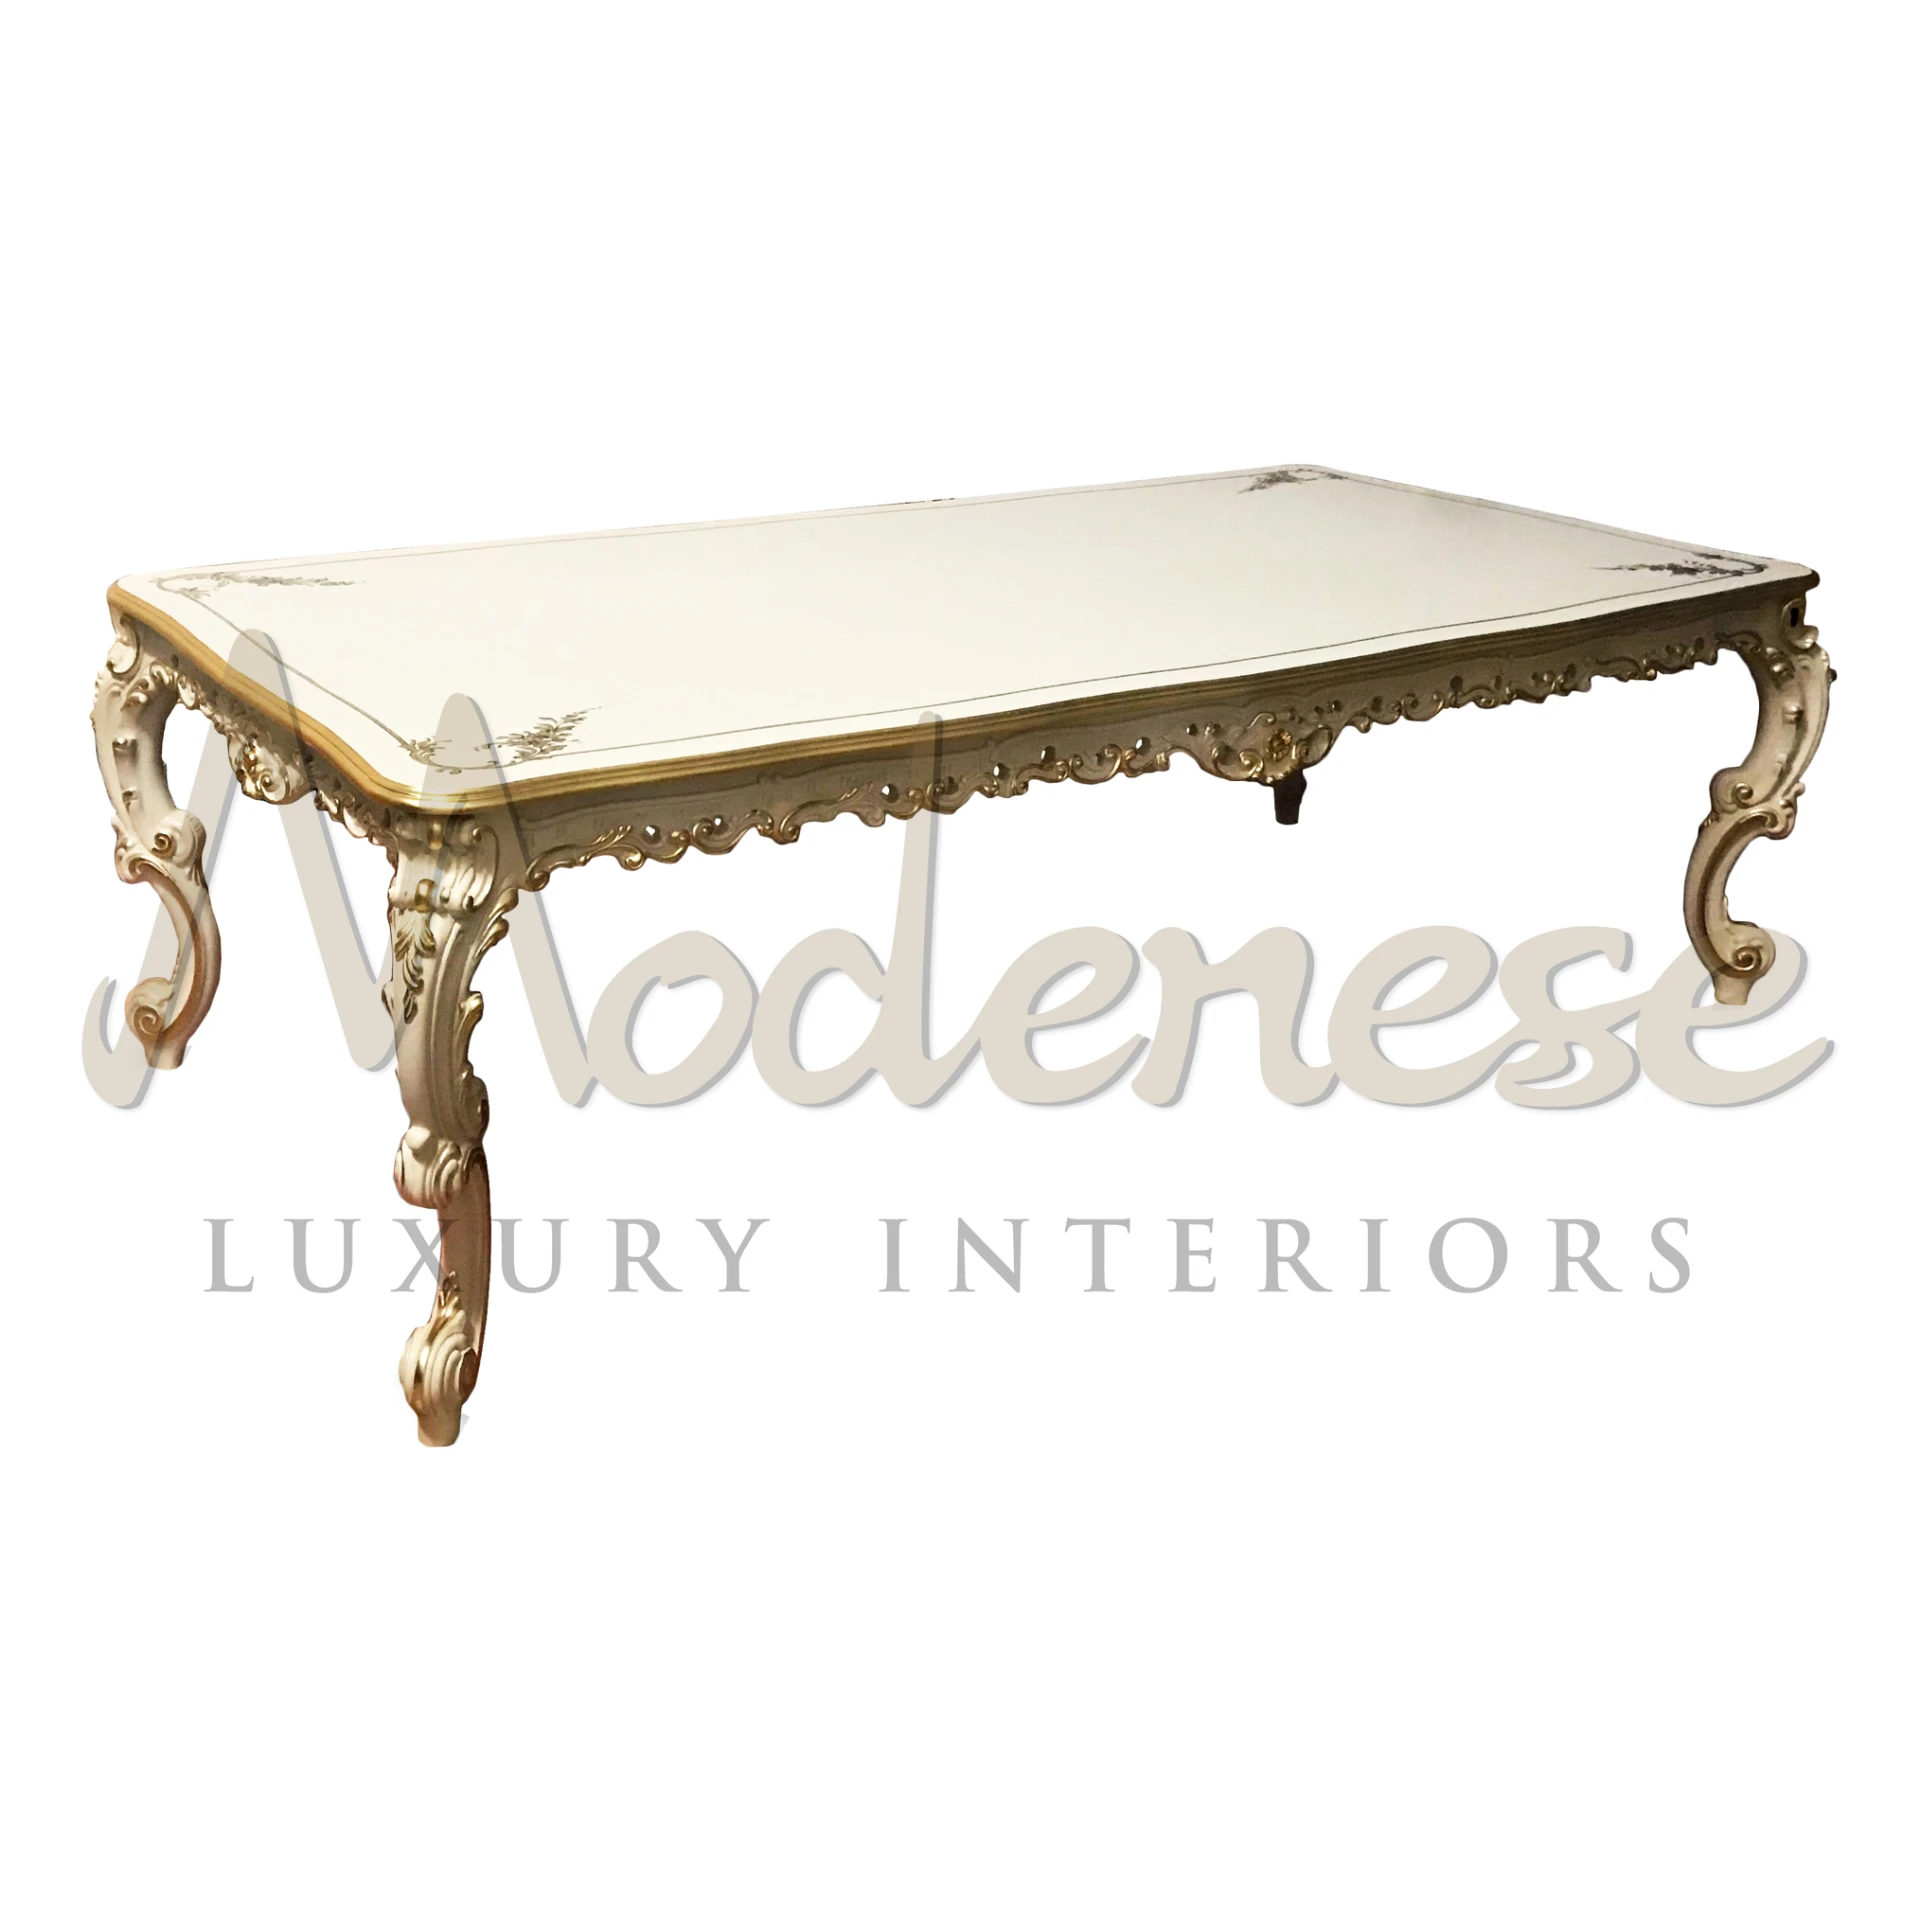 Precision meets perfection with this ivory lacquered dining table. Every detail is flawlessly presented, from the legs' wood carving to the top handmade gold decoration.
